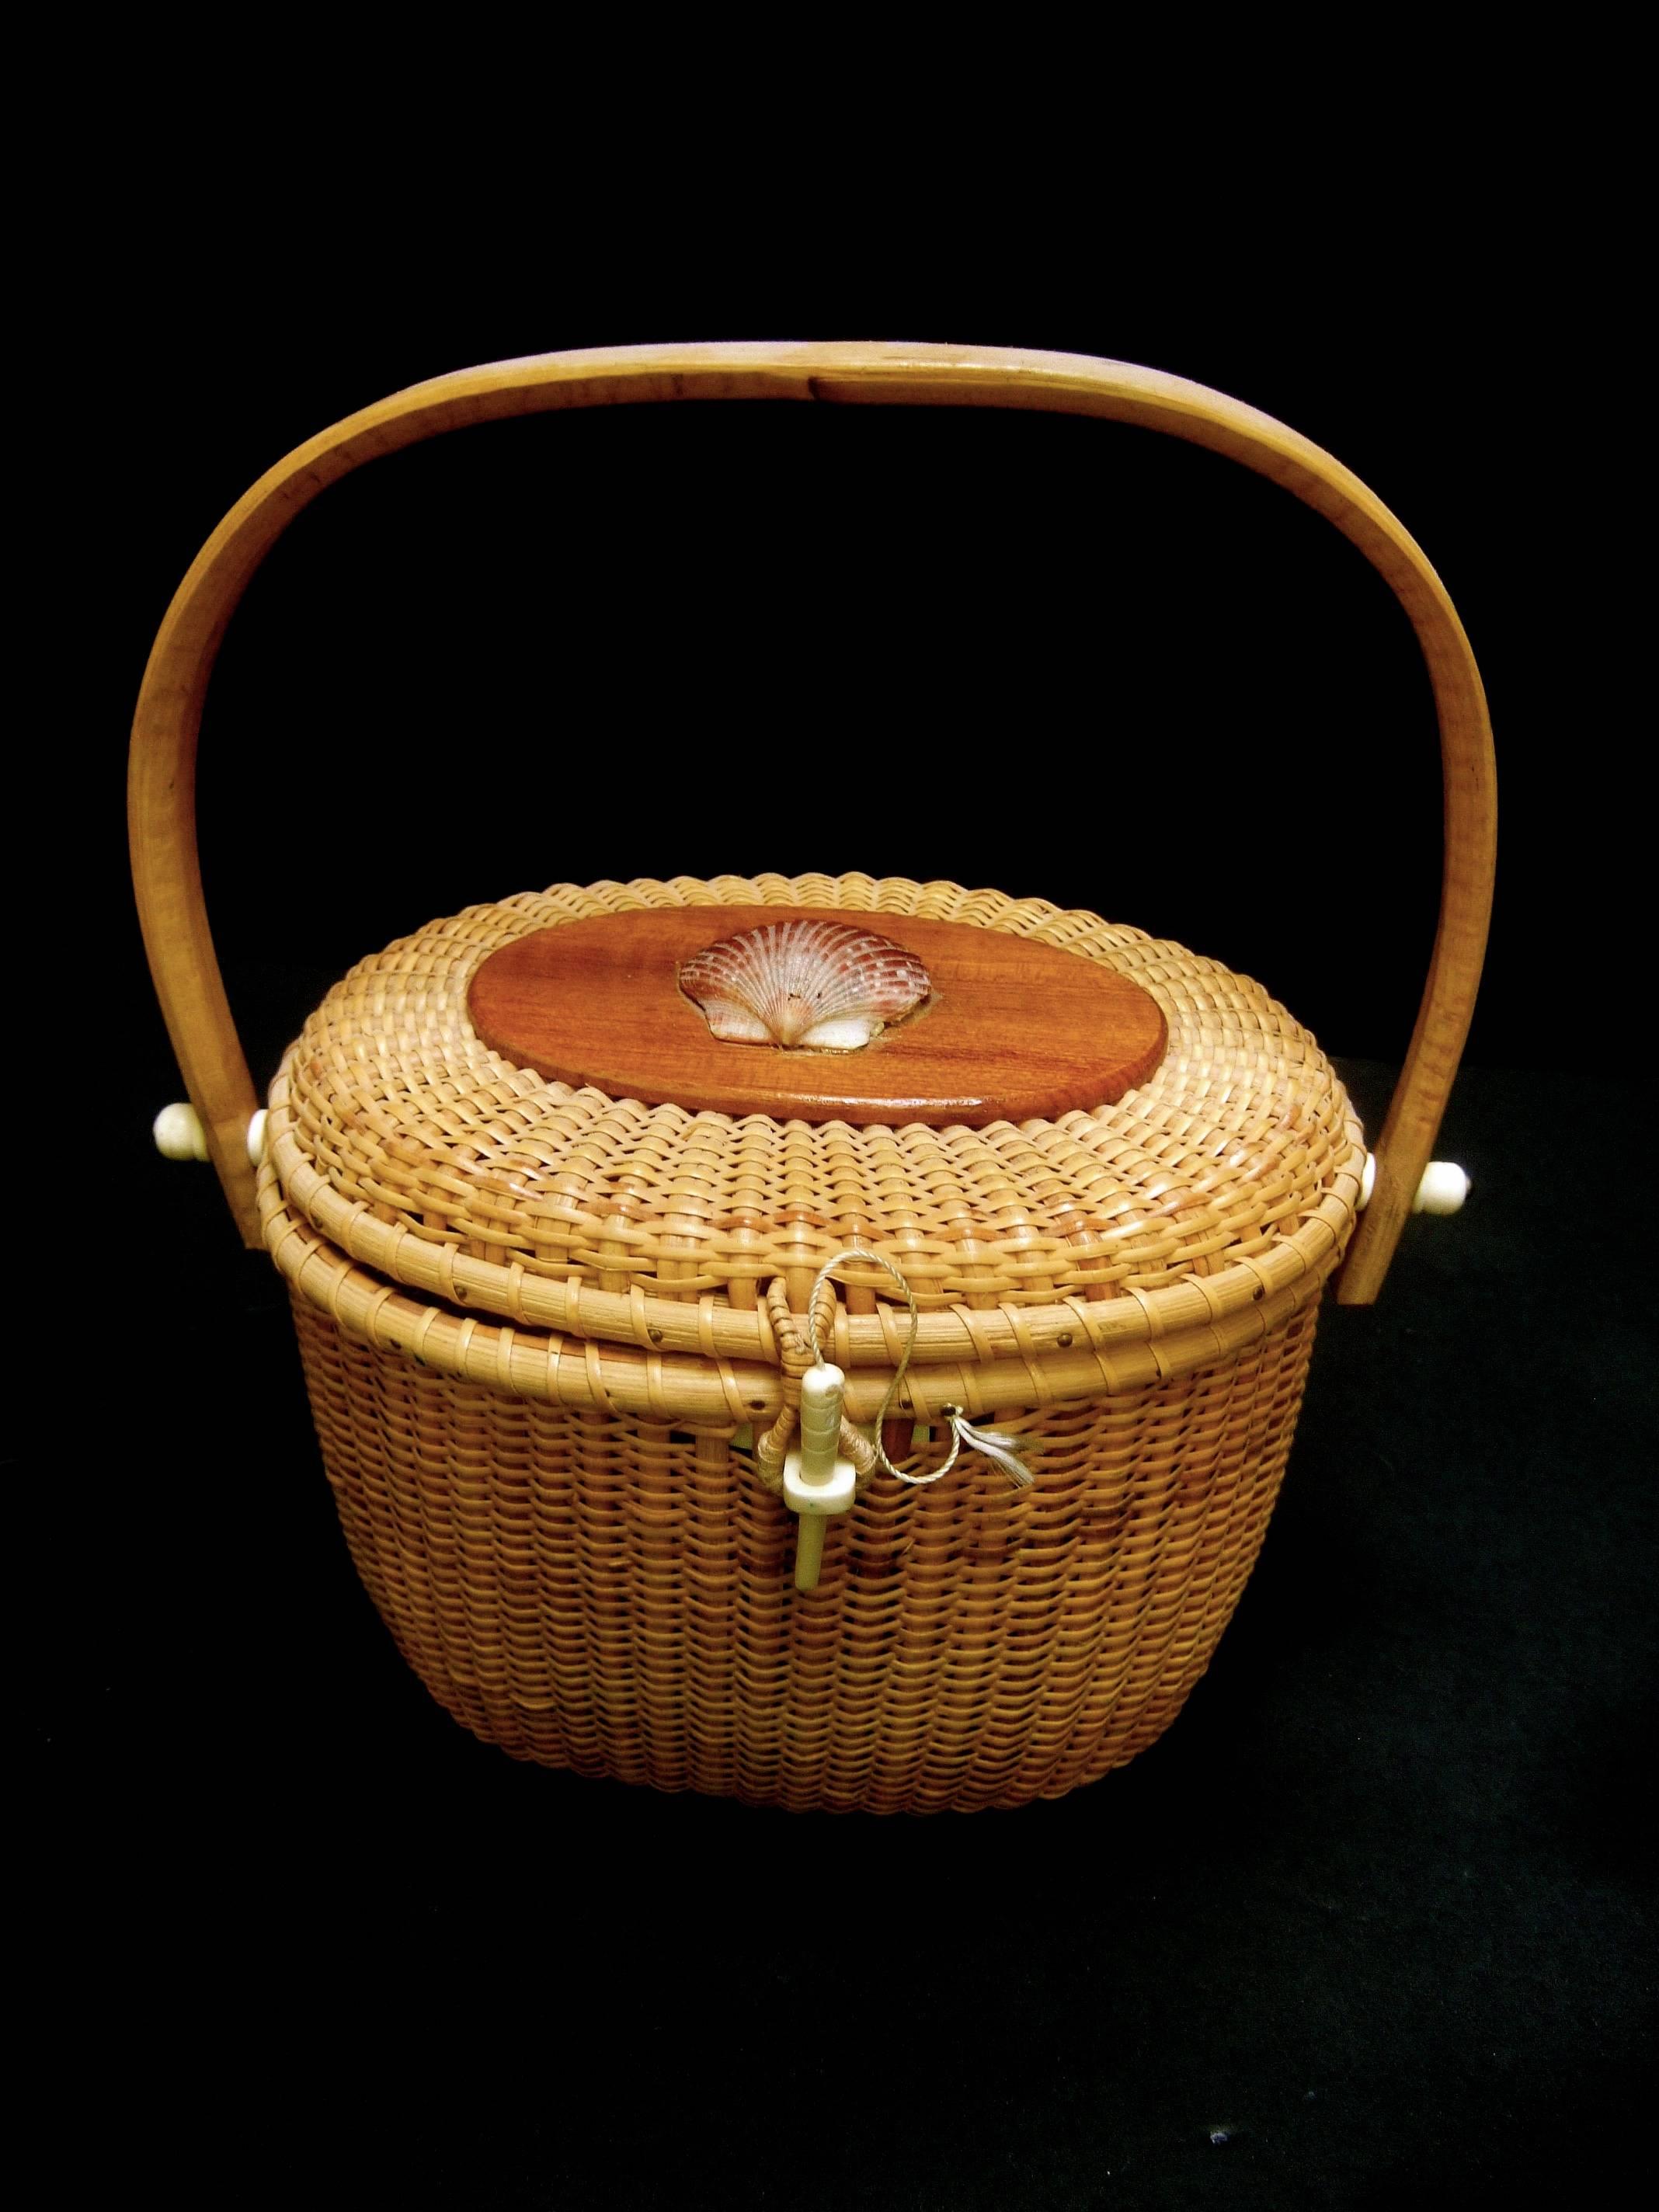 Nantucket style woven wicker basket handbag 
The iconic summer handbag is adorned 
with a sea shell mounted on the oval wood
plaque lid cover

Carried with a bent wood swivel handle 
Secures with an ivory resin toggle cylinder
closure

Makes a chic